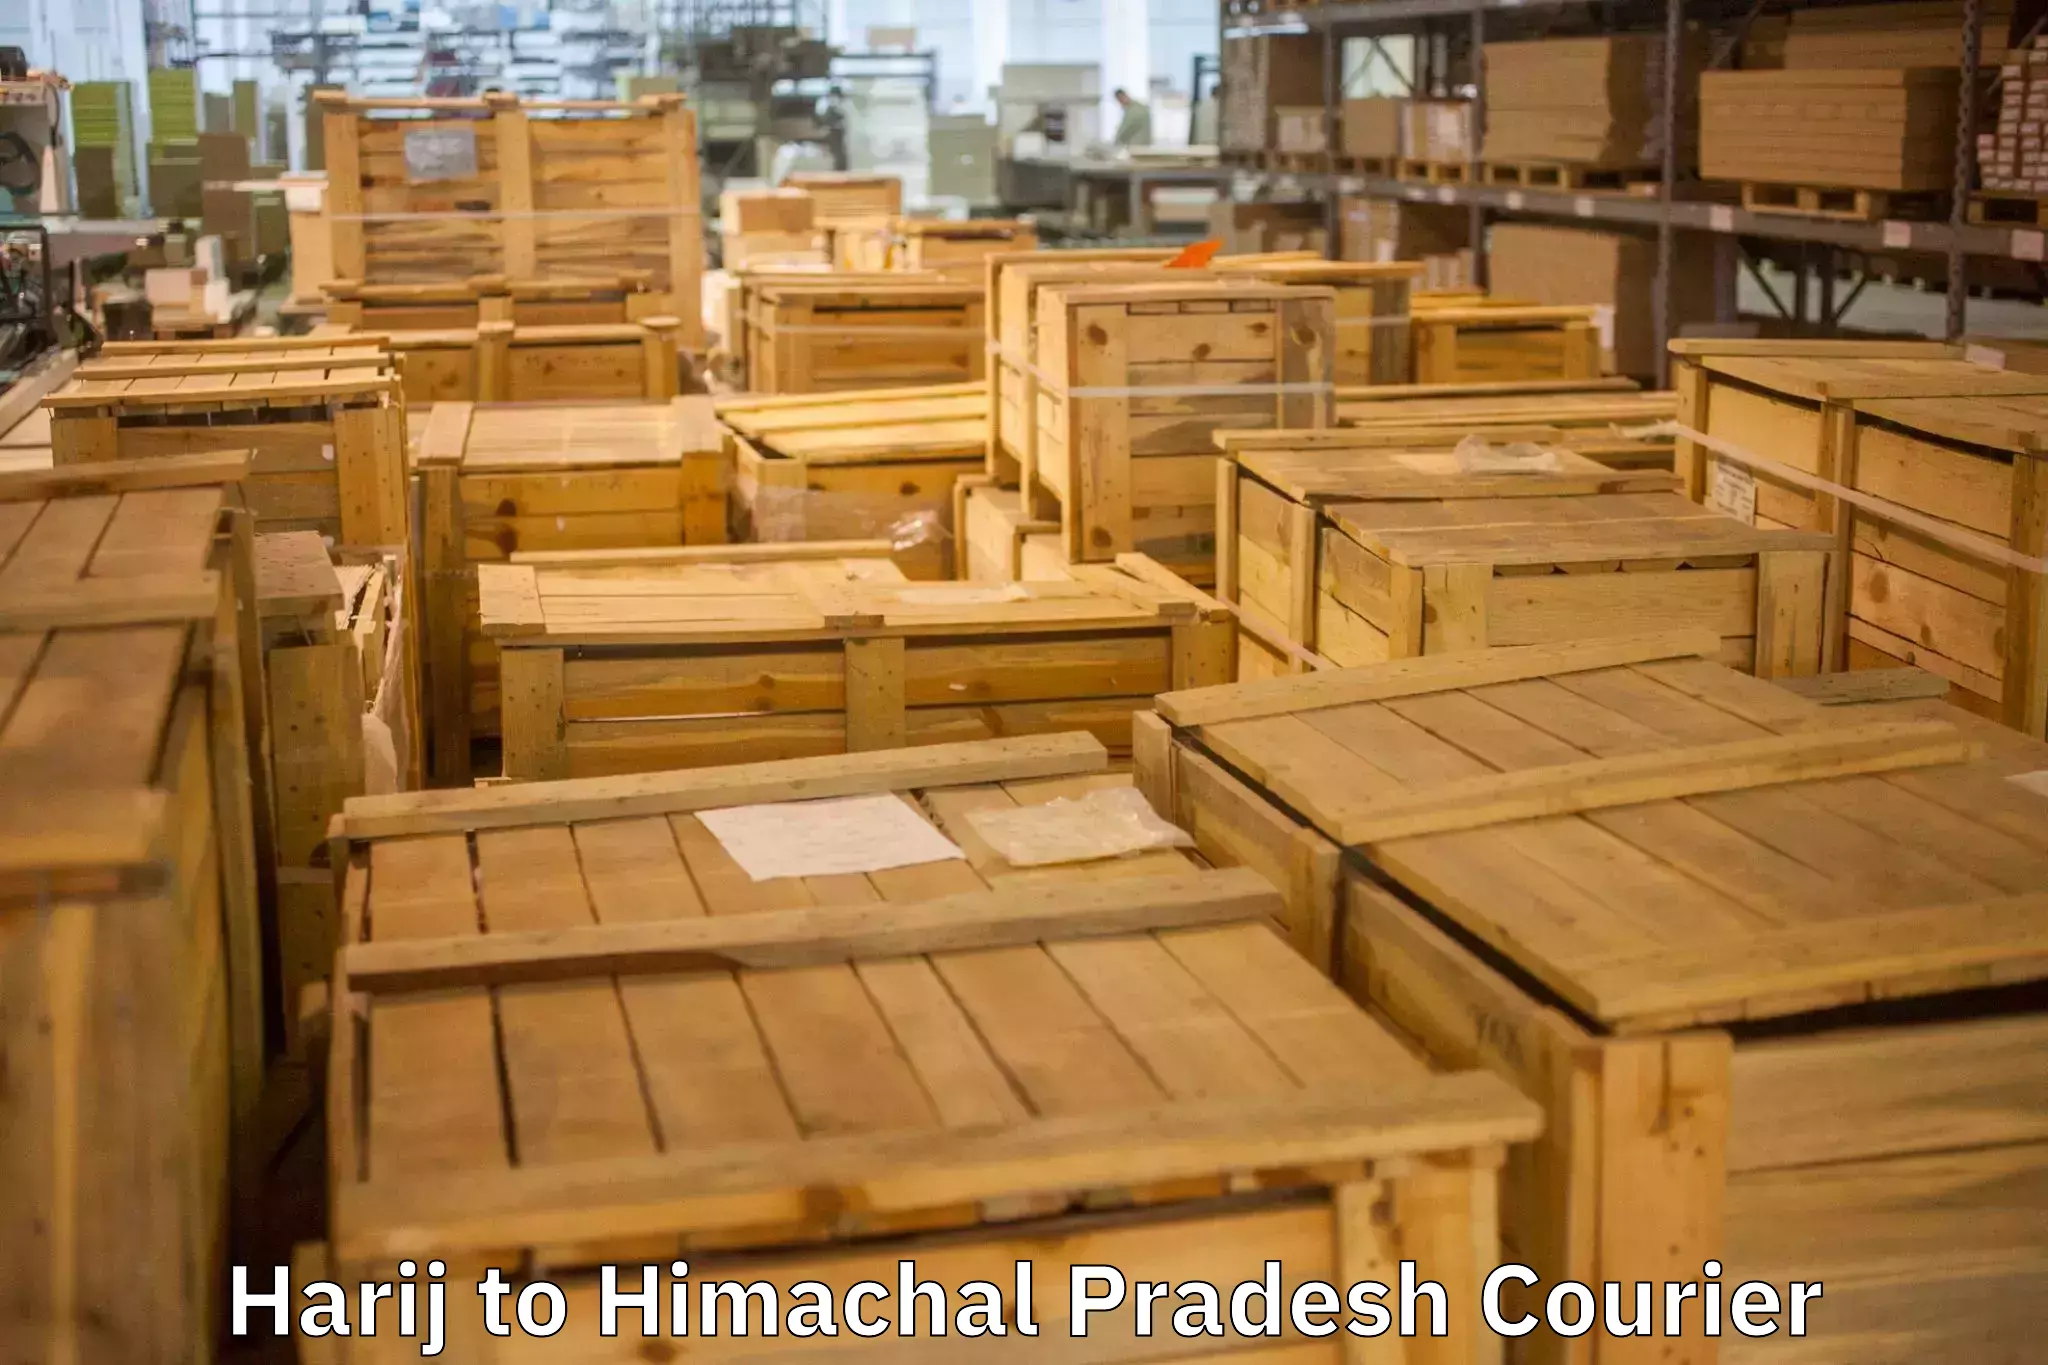 Efficient packing and moving Harij to Chintpurni